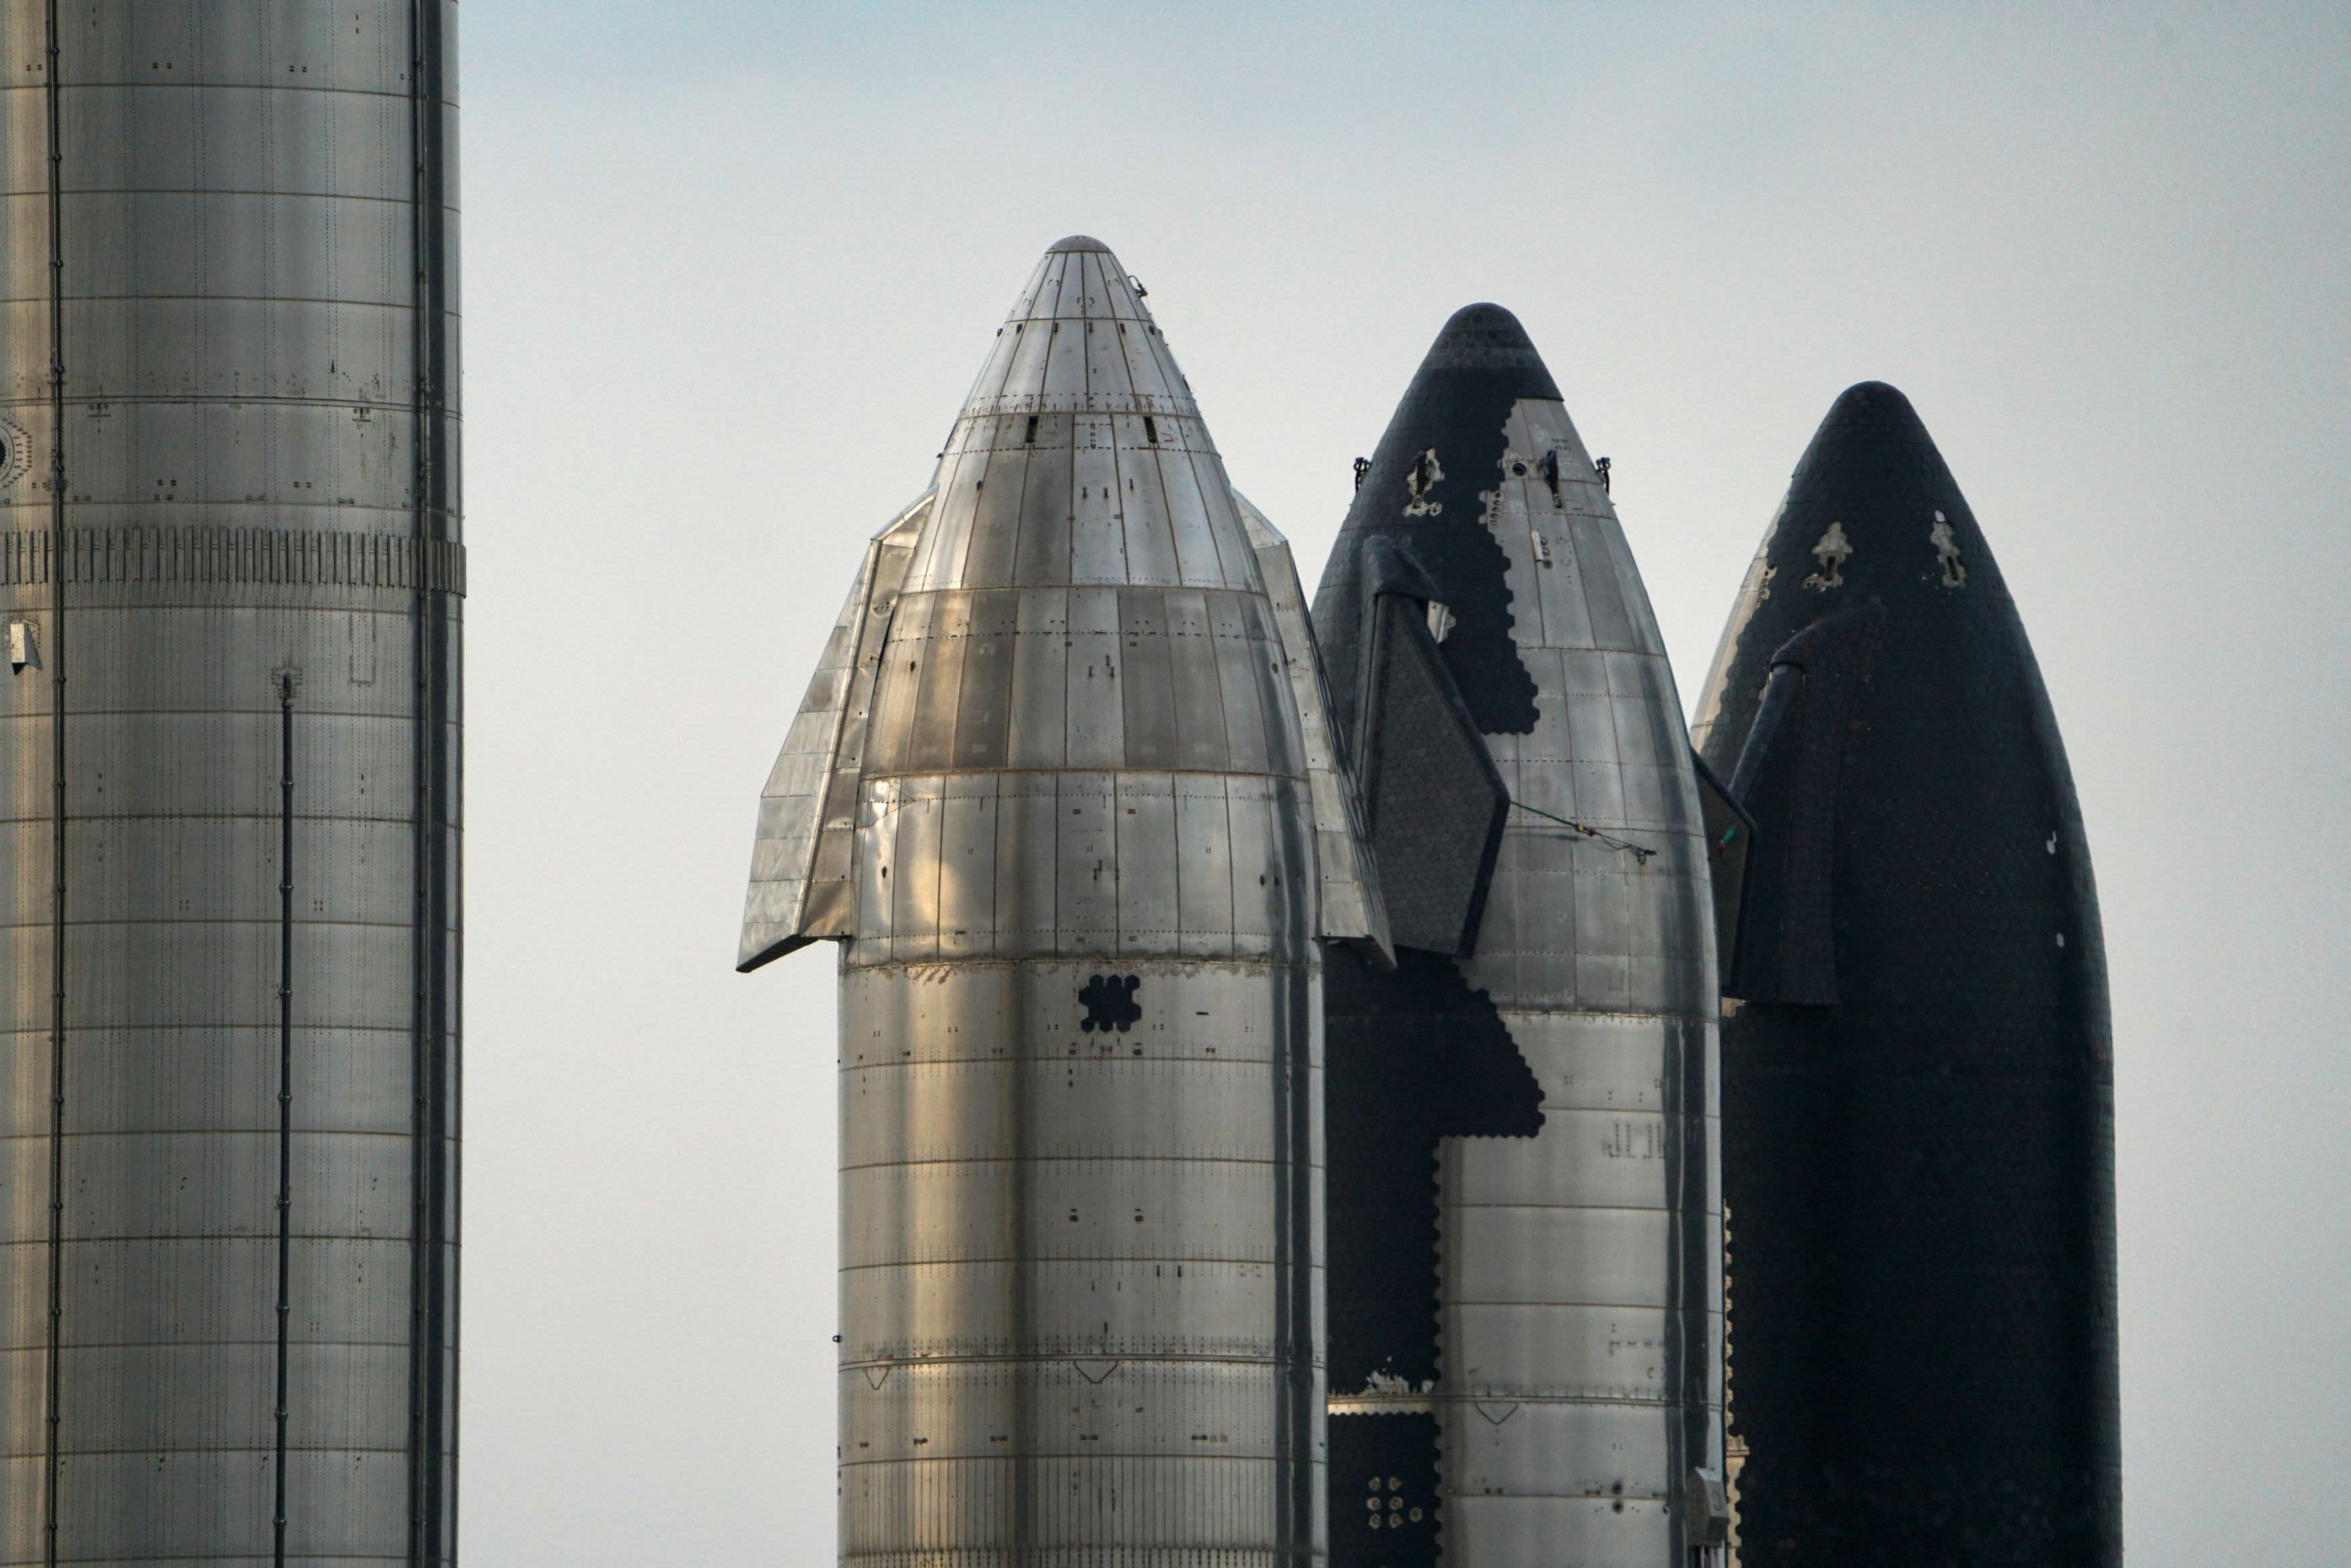 elon-musk-starship-ready-to-launch-but-faa-requires-corrective-actions